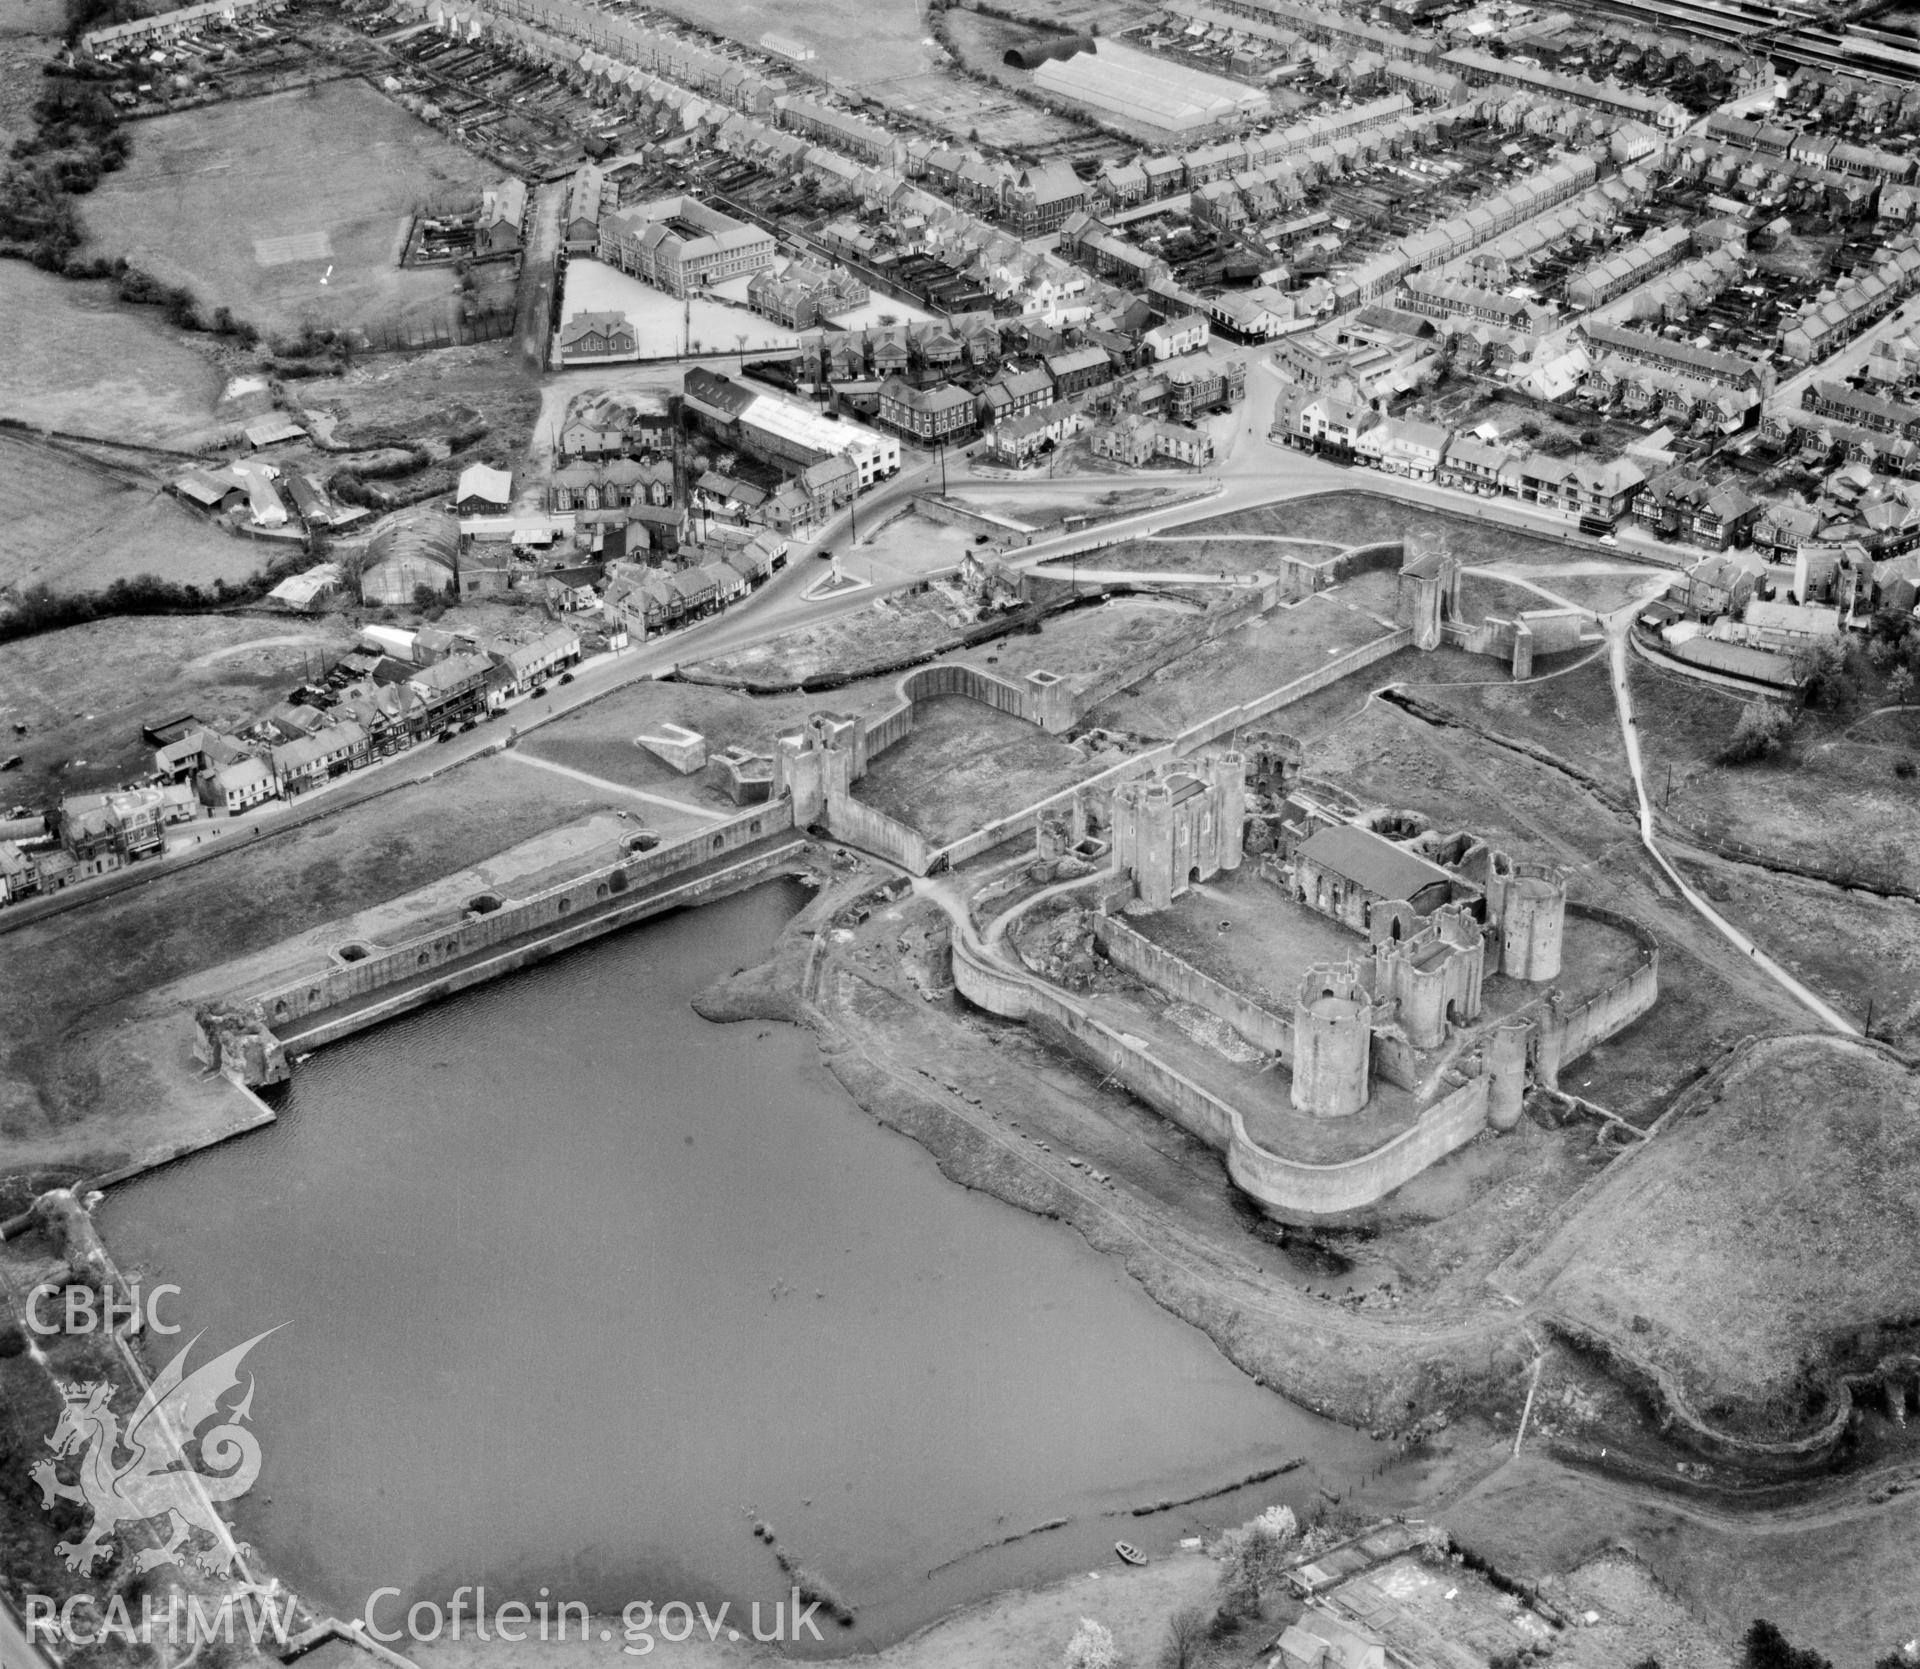 View of Caerphilly showing castle and school